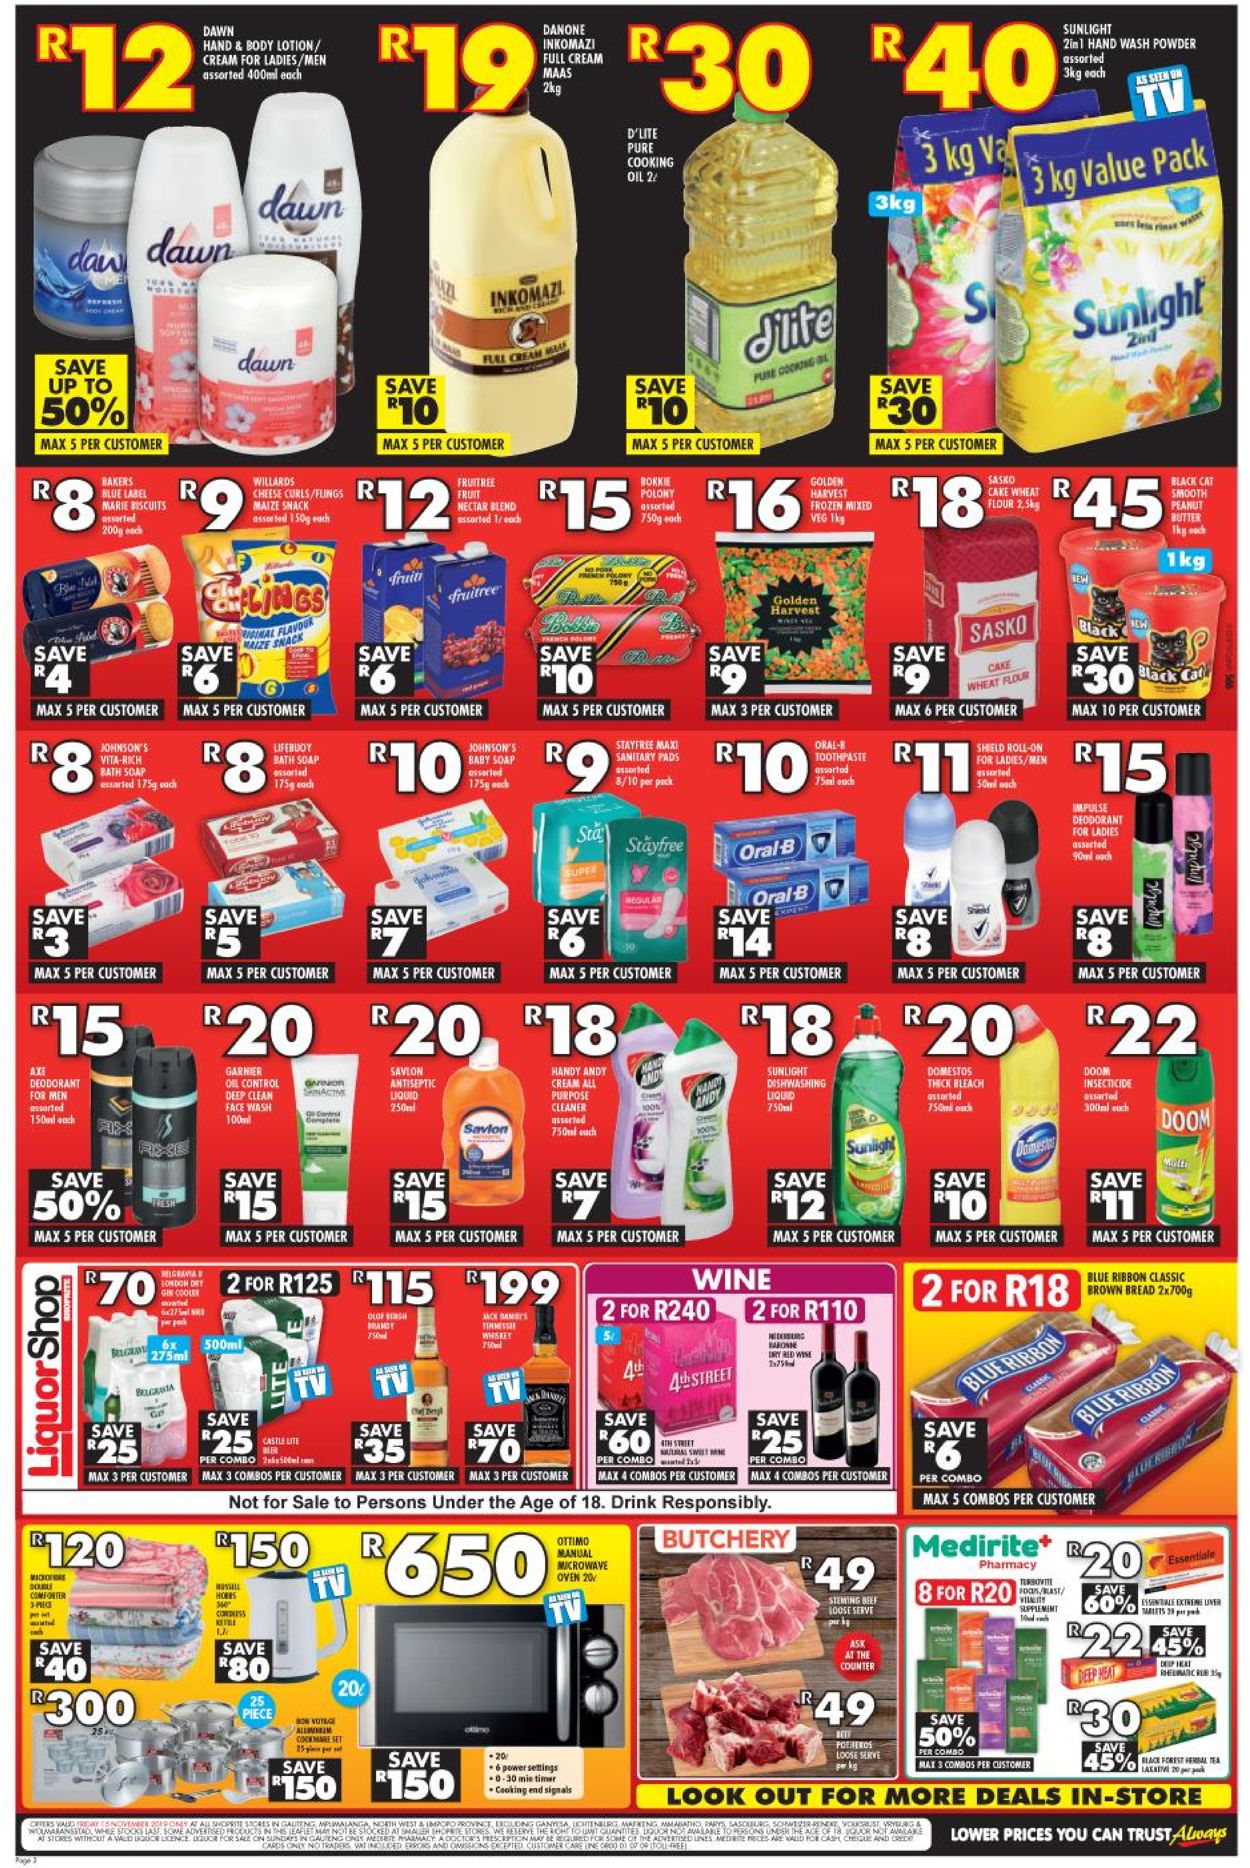 Shoprite BIG RED FRIDAY 2019 Current catalogue 2019/11/15 2019/11